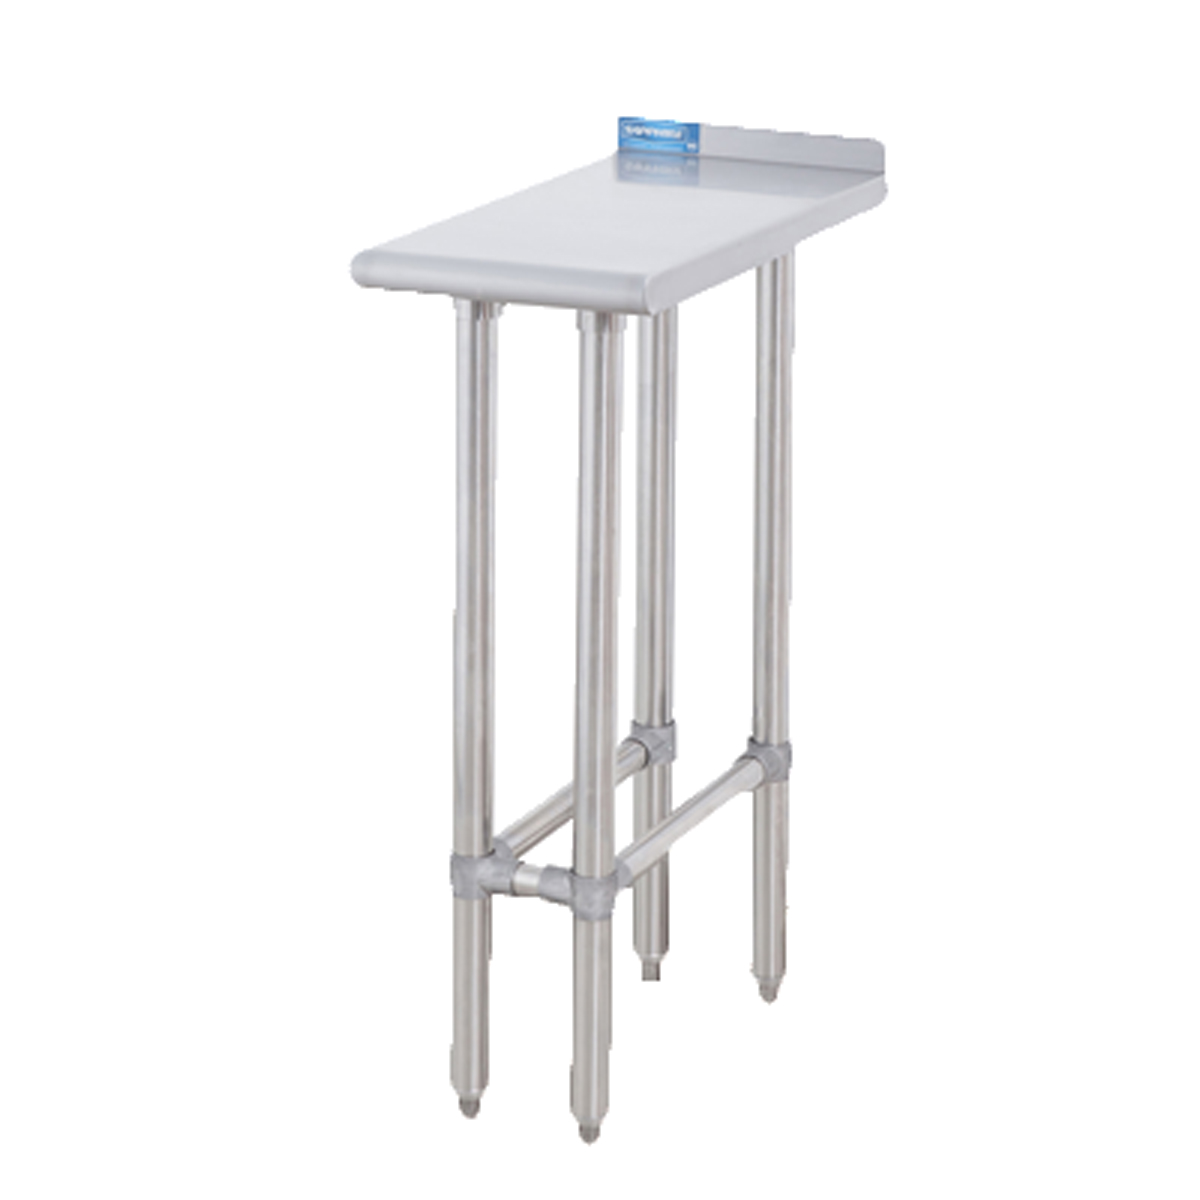 Sapphire SMEFT-2412 Equipment Filler Table with Stainless Steel Top, 12"W x 24"D